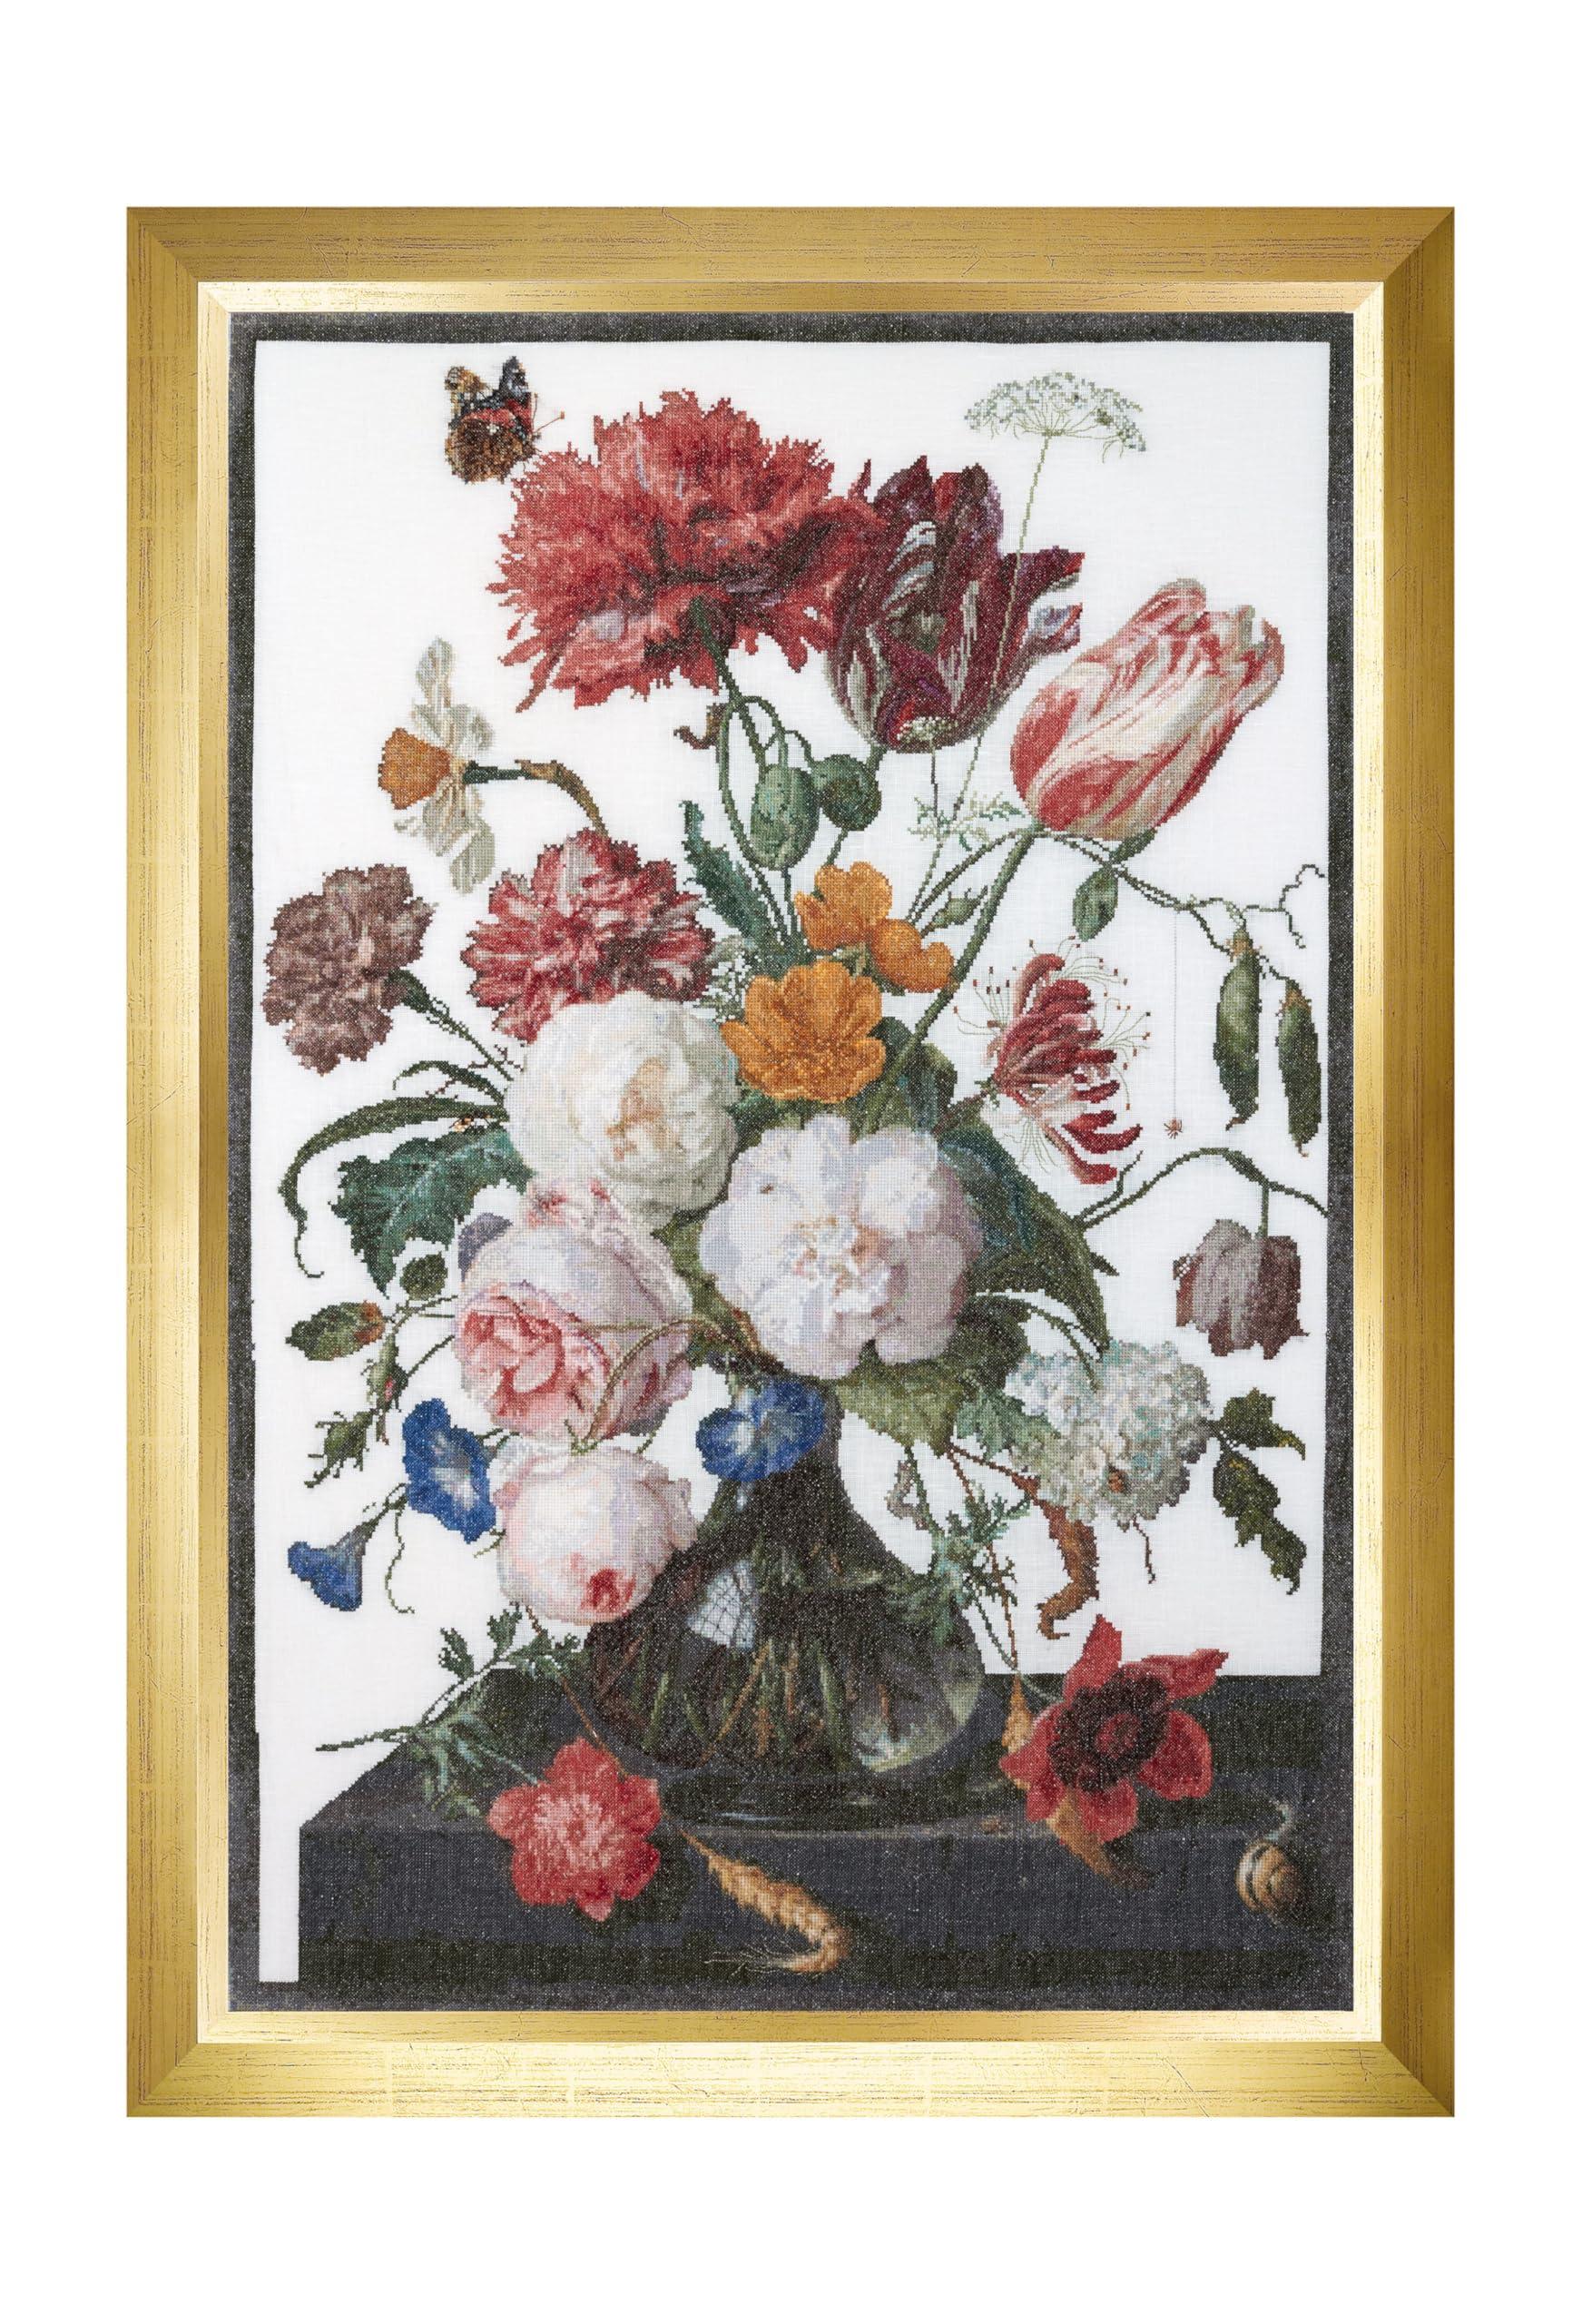 Thea Gouverneur - Counted Cross Stitch Kit - Still Life with Flowers in a glass Vase - Linen - 36 count - for Adults - DMC Embroidery Threads and other Cross Stitch Supplies Included - 785